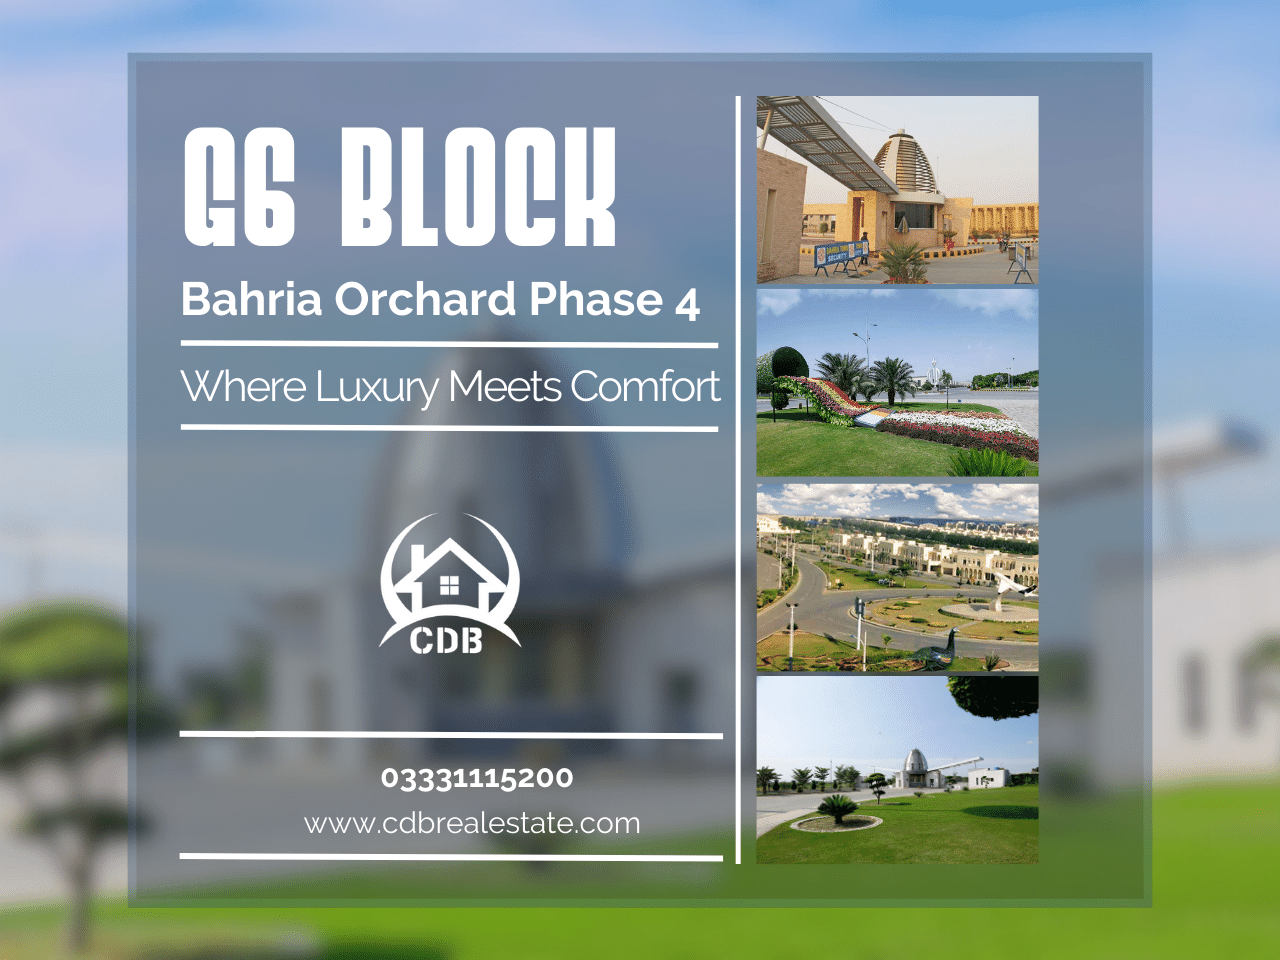 G6 Block, Bahria Orchard Phase 4